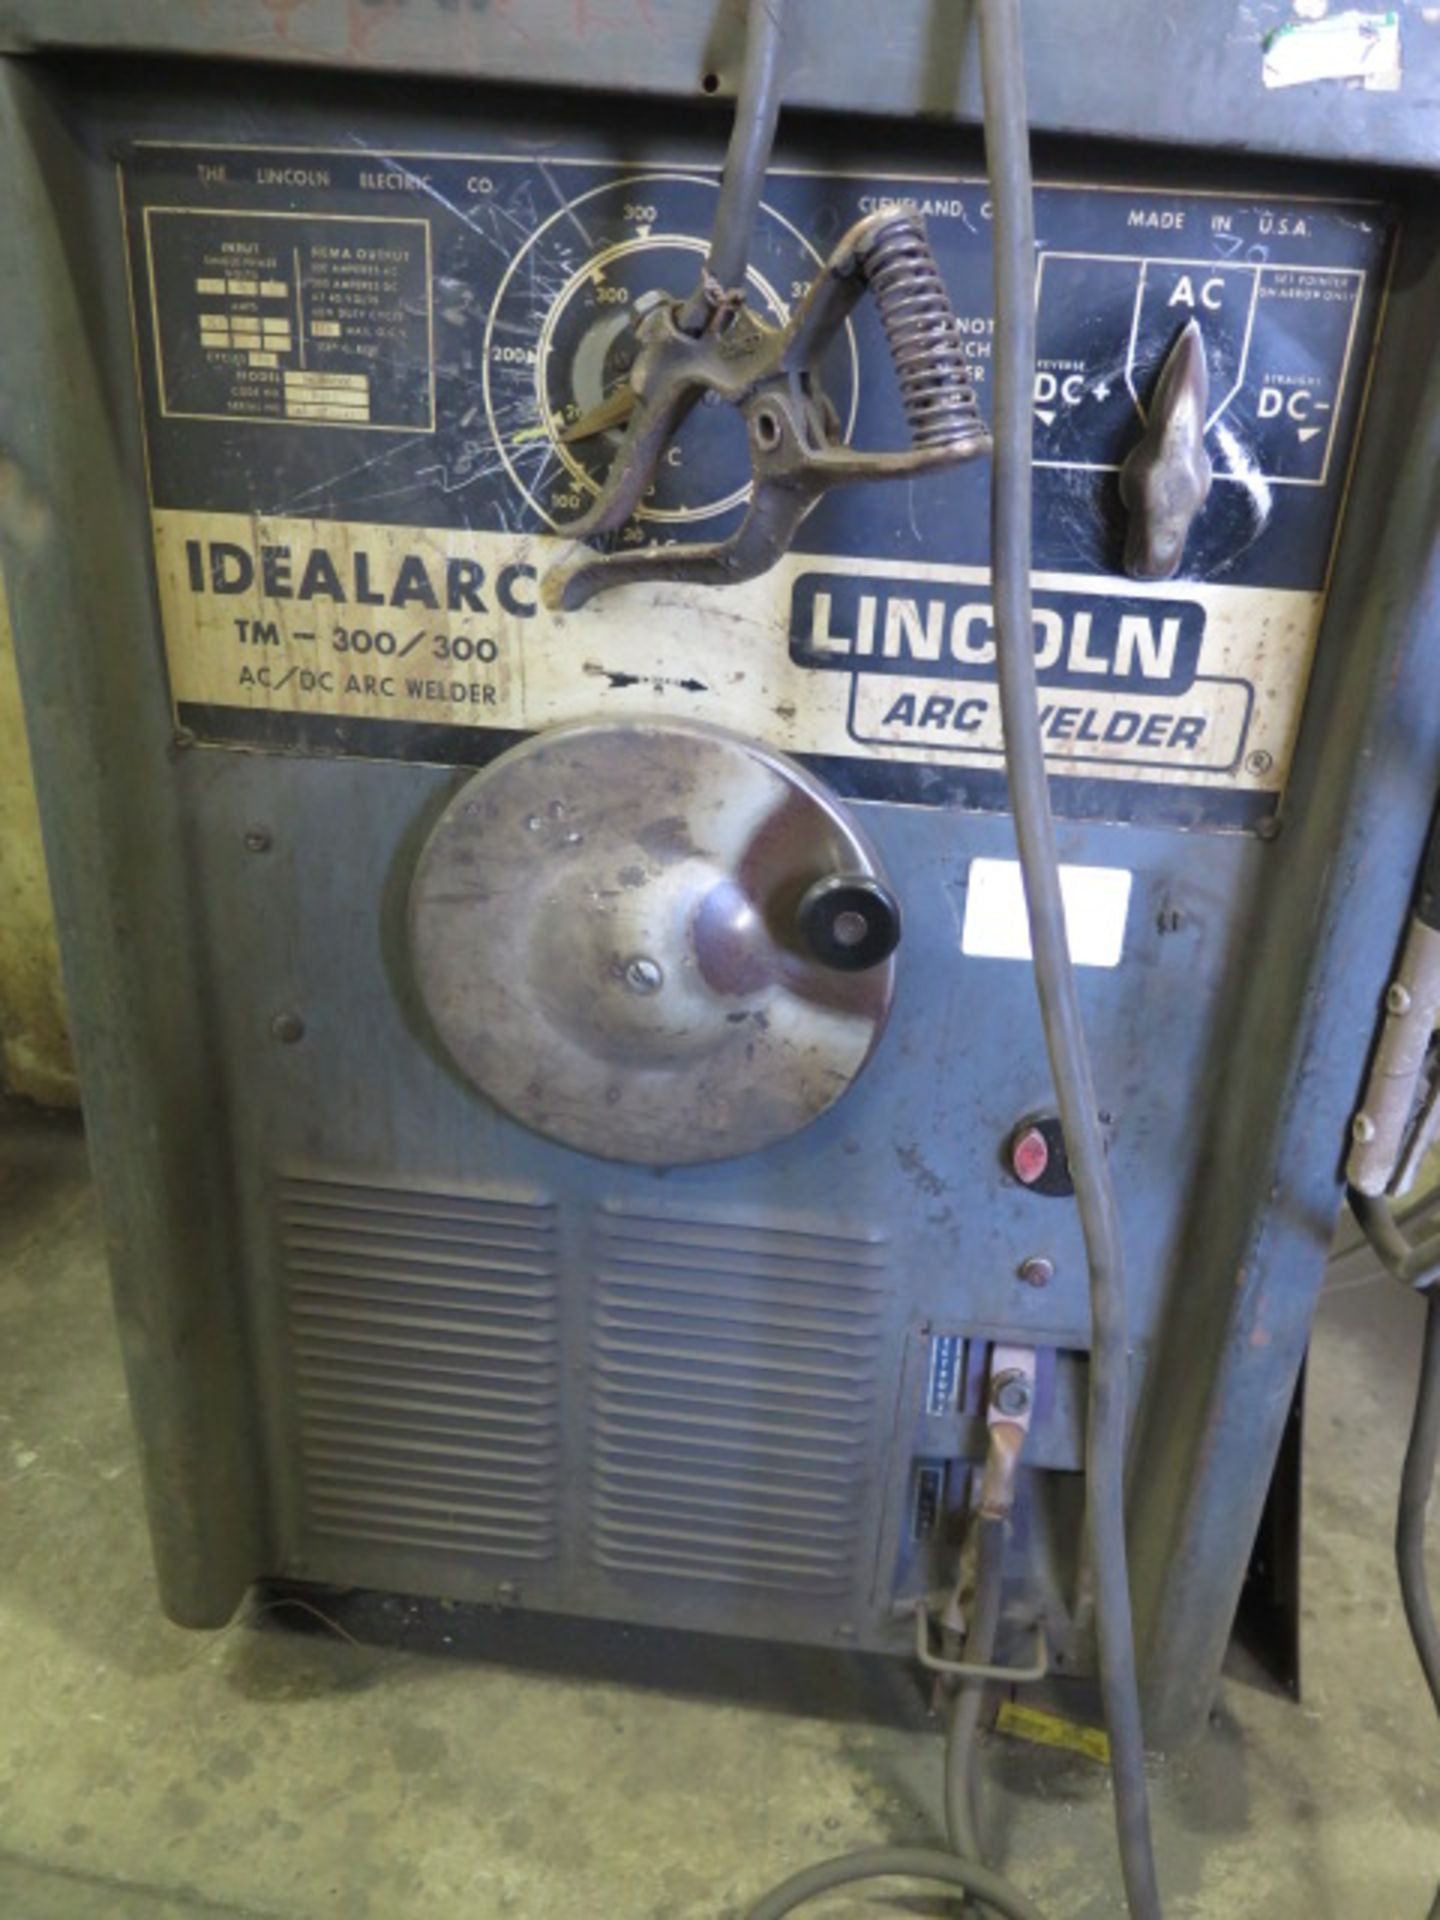 Lincoln Idealarc TM-300/300 AC/DC Arc Welding Power Source s/n AC-278841 - Image 2 of 3